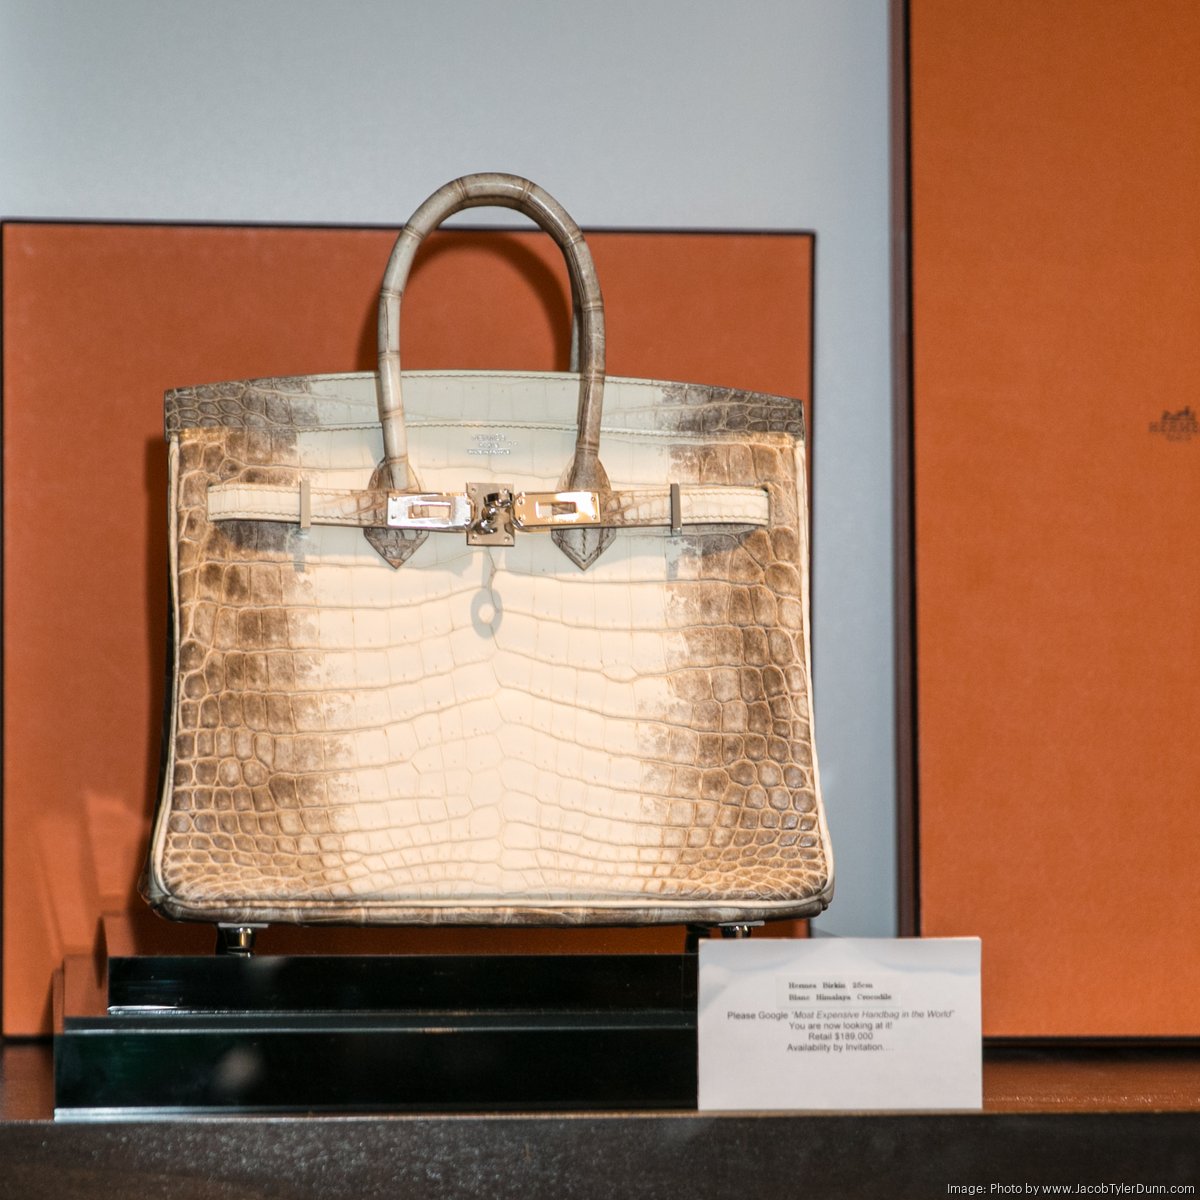 World's most expensive Hermes bag can't even hold your